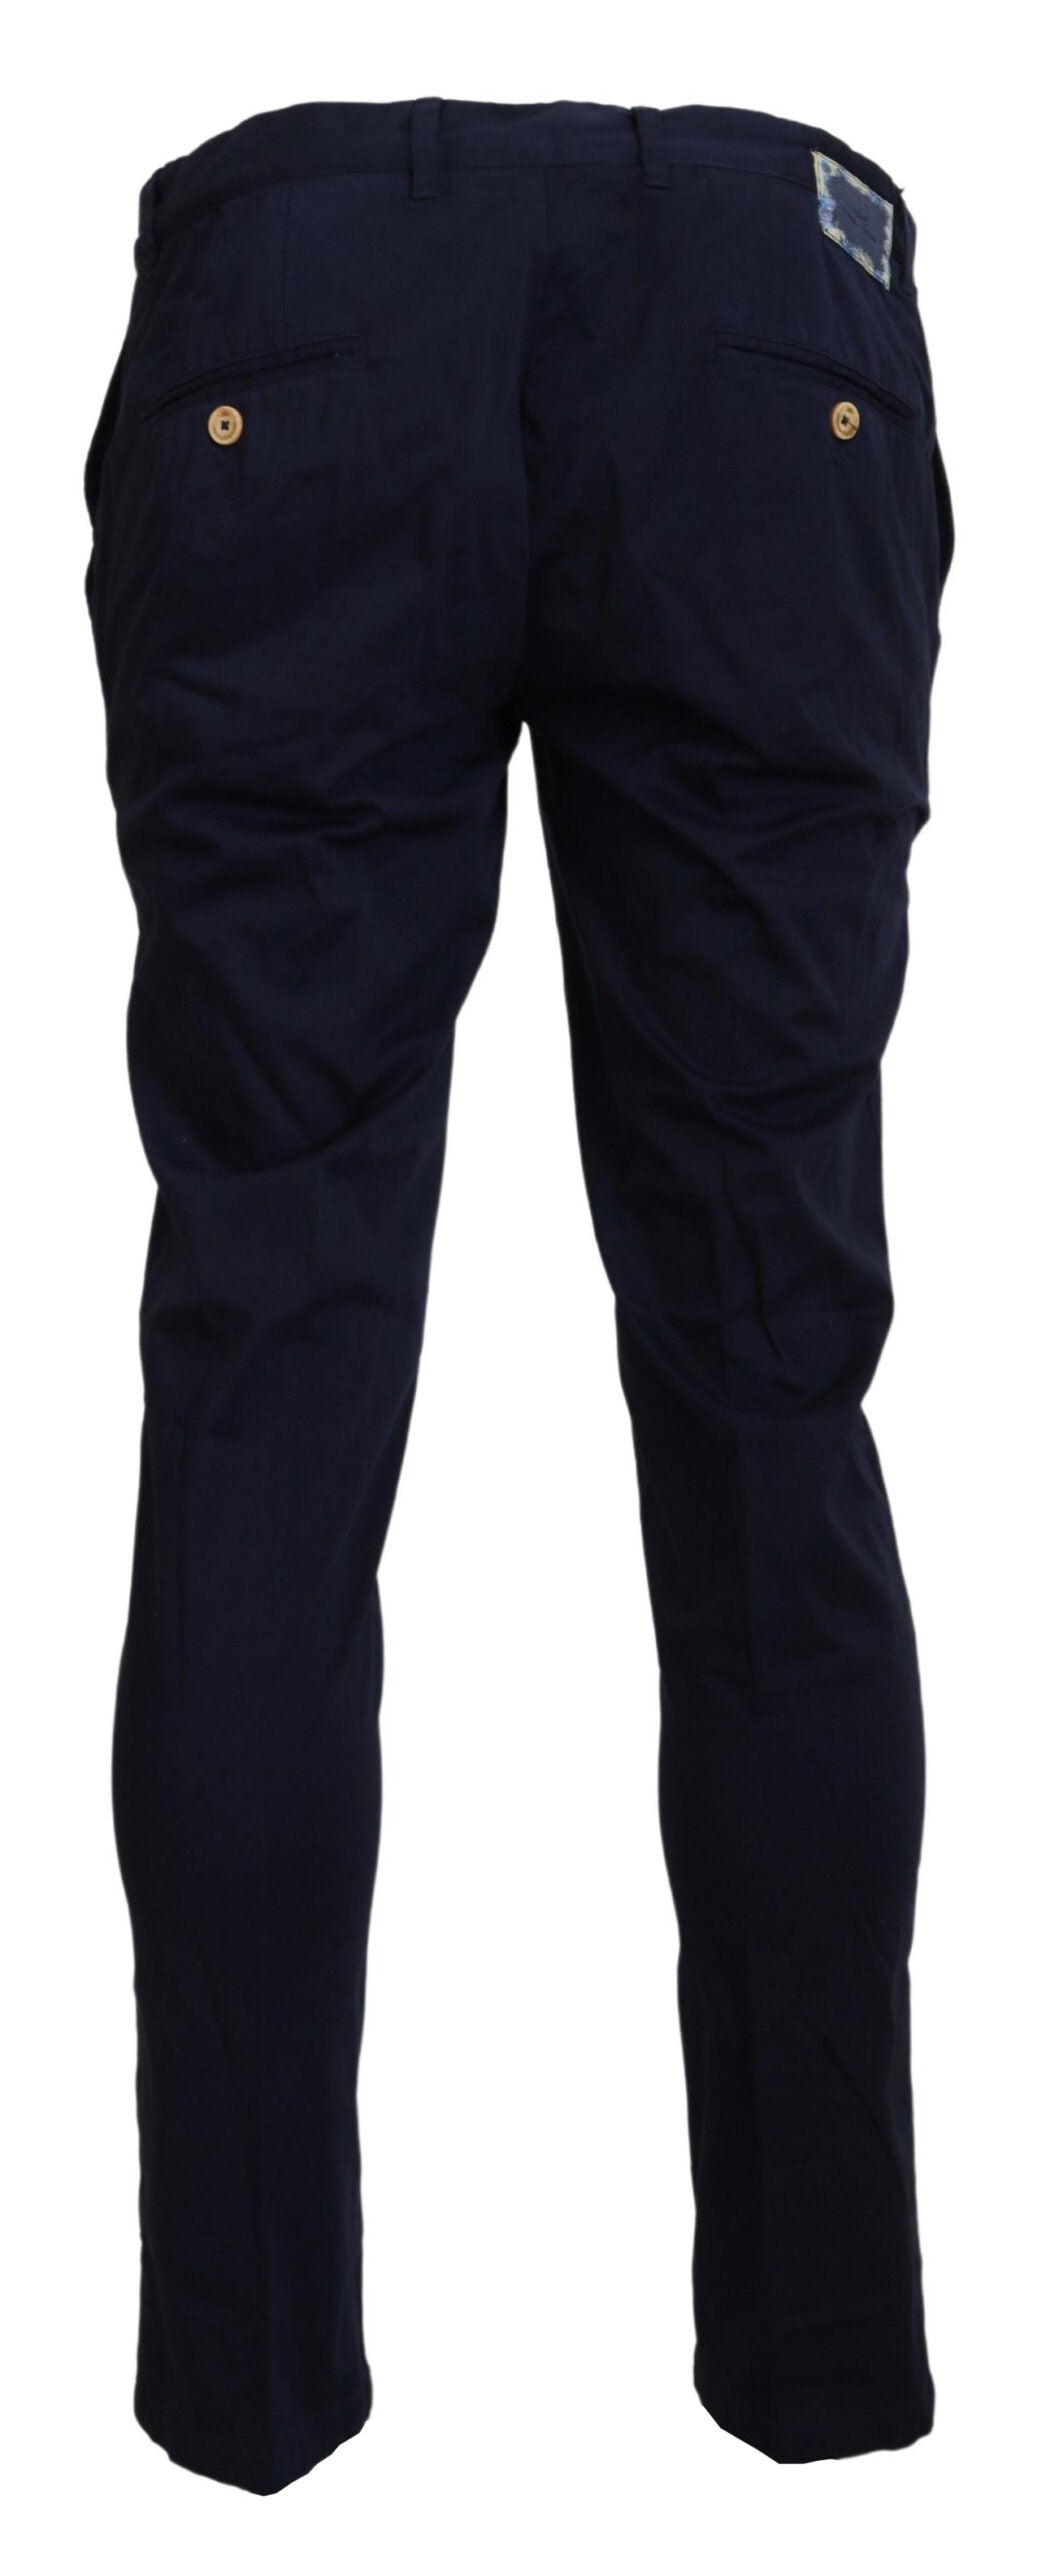 Domenico Tagliente Dark Blue Cotton Skinny Men Pants - Designed by Domenico Tagliente Available to Buy at a Discounted Price on Moon Behind The Hill Online Designer Discount Store